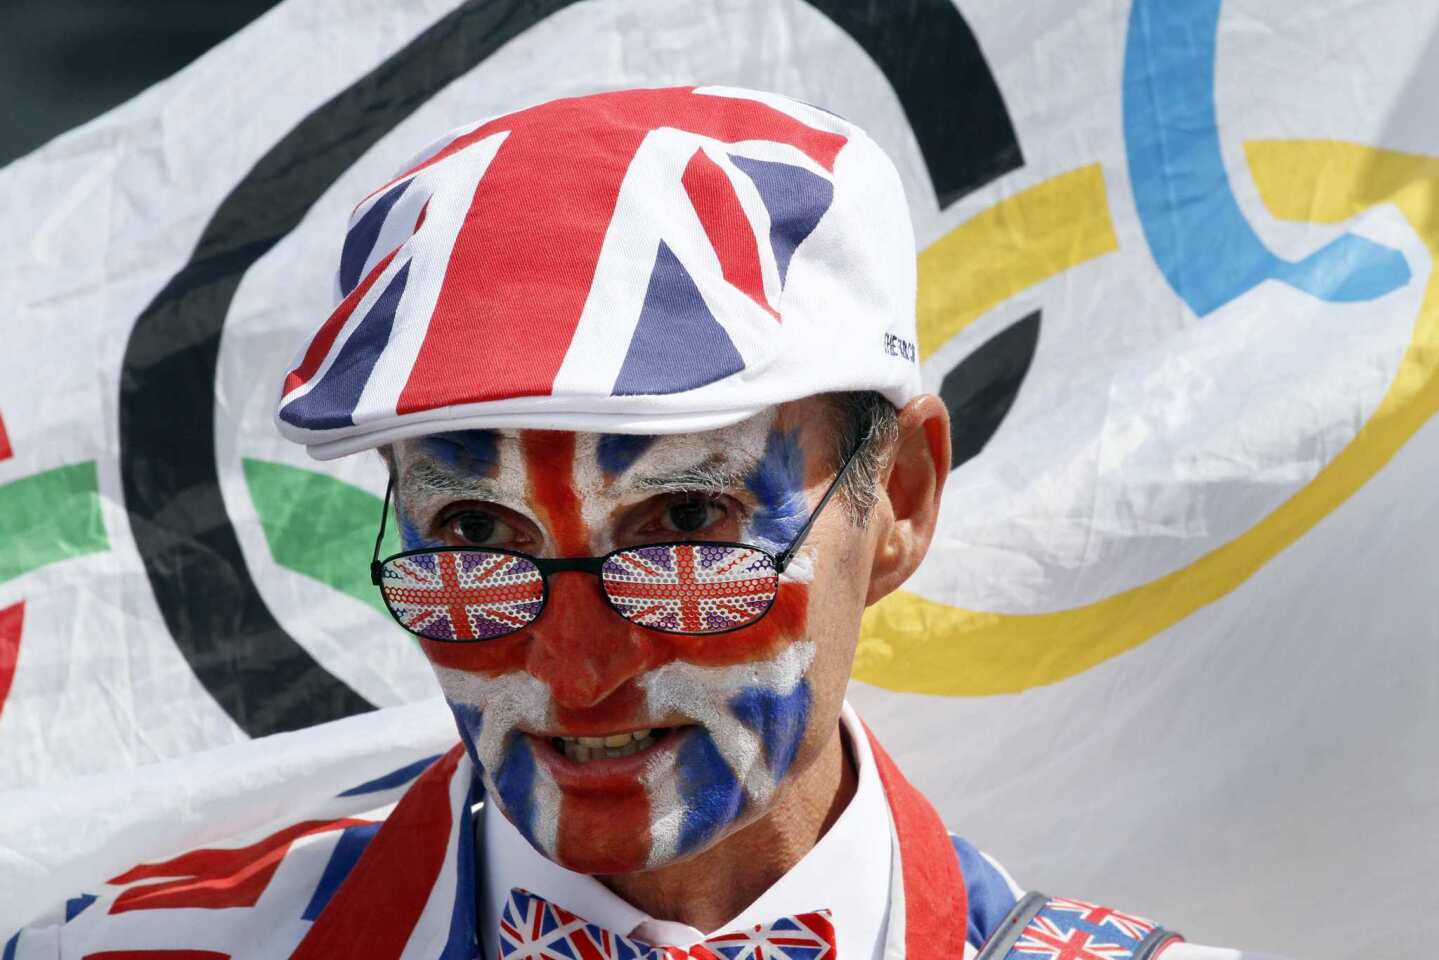 Michael Burn of Watford, England, walks around Olympic Park garbed from head to toe in the Union Jack and carrying an Olympic rings flag. "I'm a passionate spectator," he said. He has tickets to 12 events, including opening and closing ceremonies.